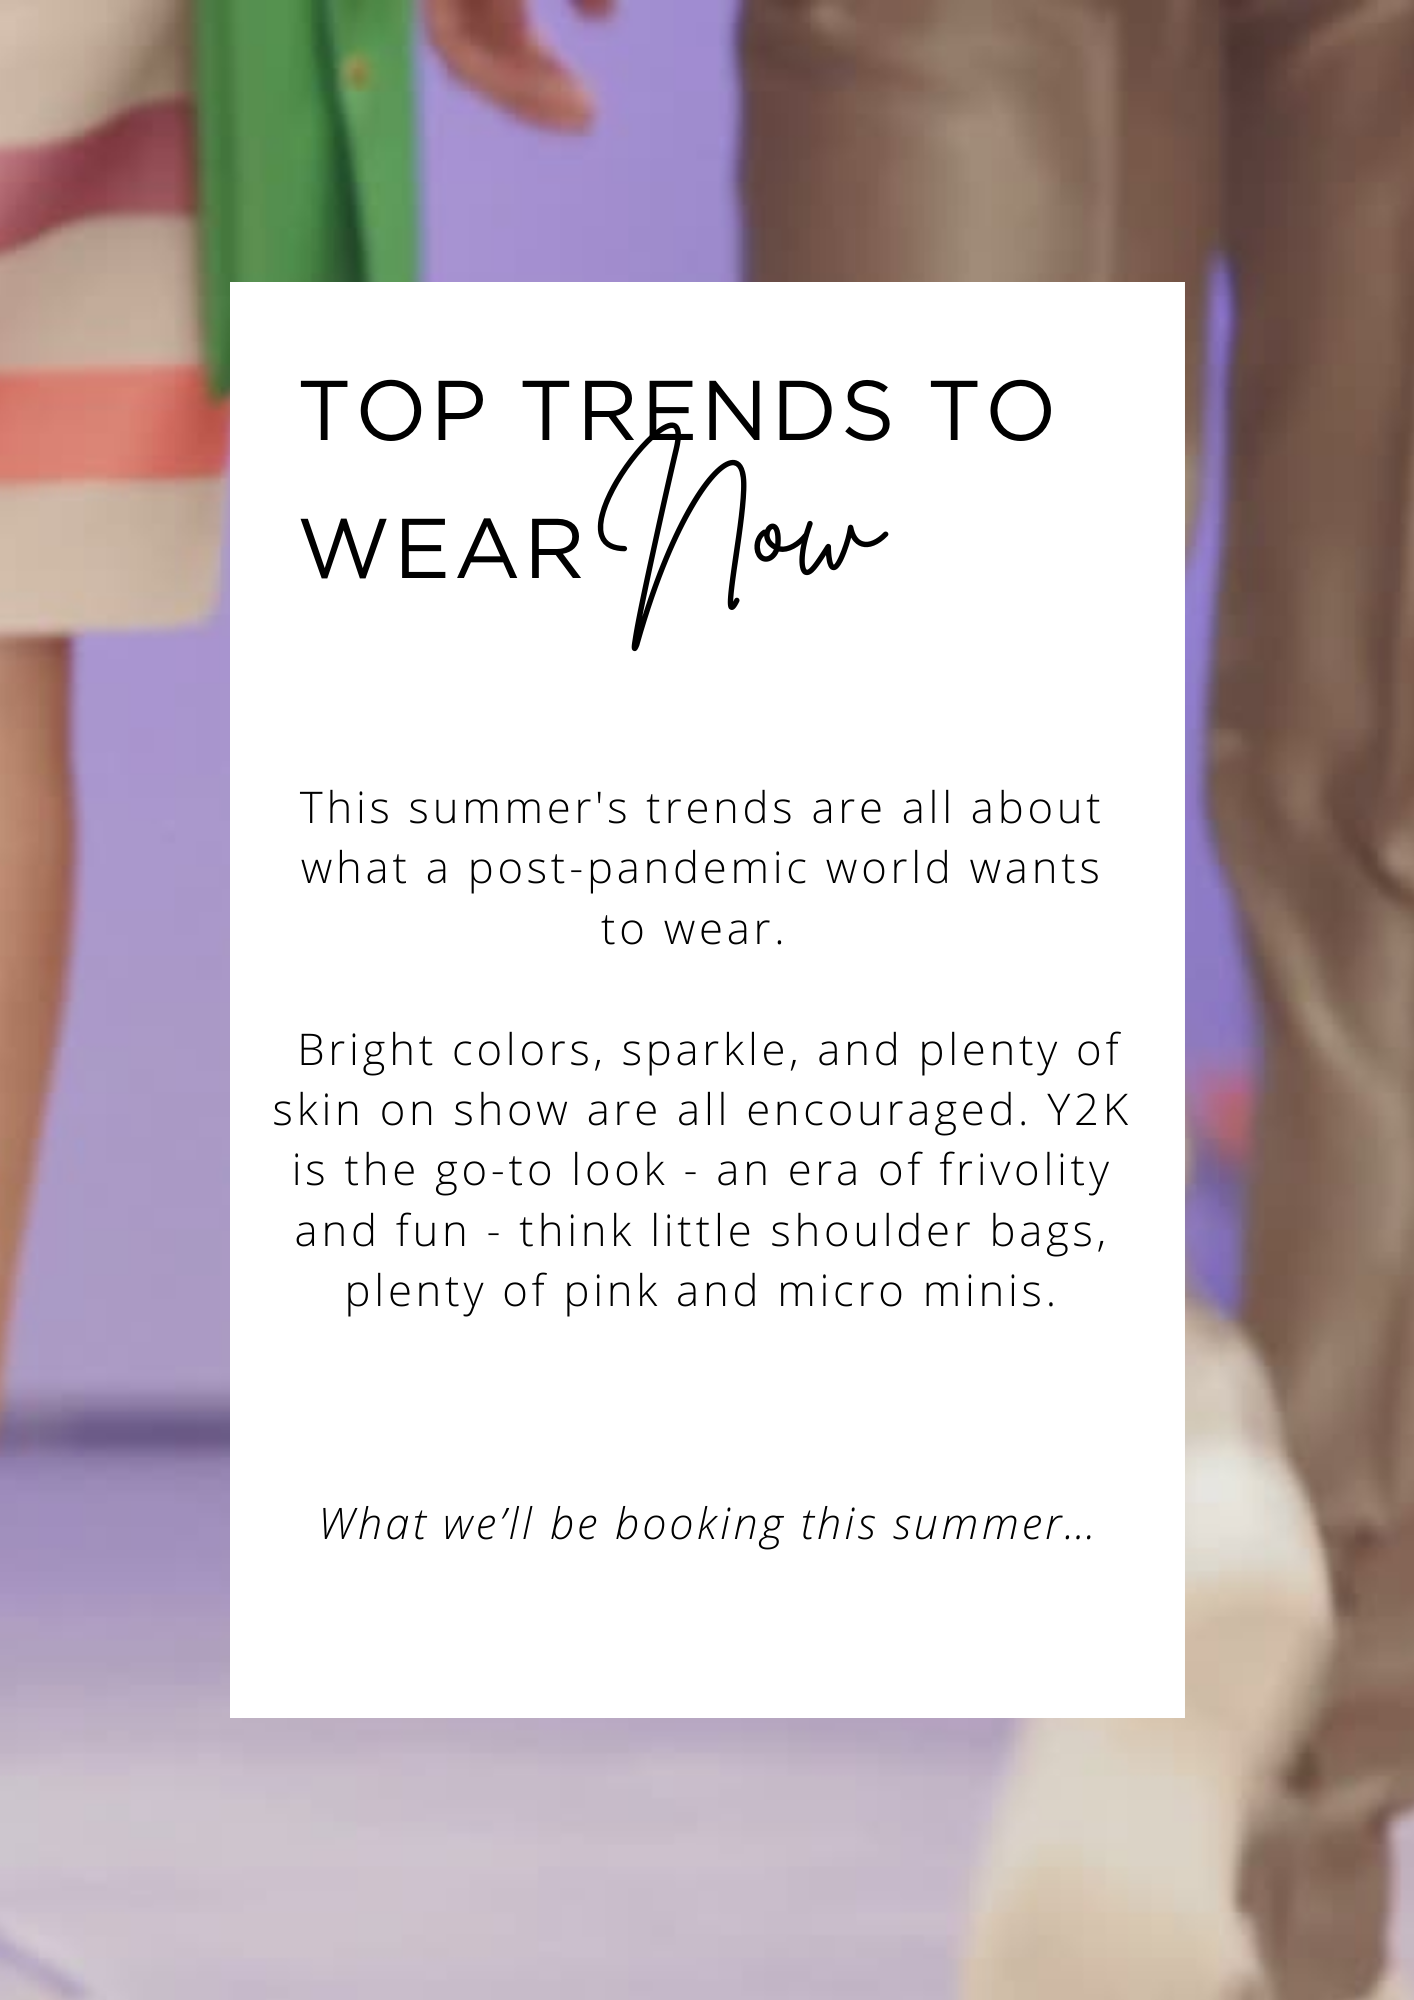 TOP STYLE TRENDS